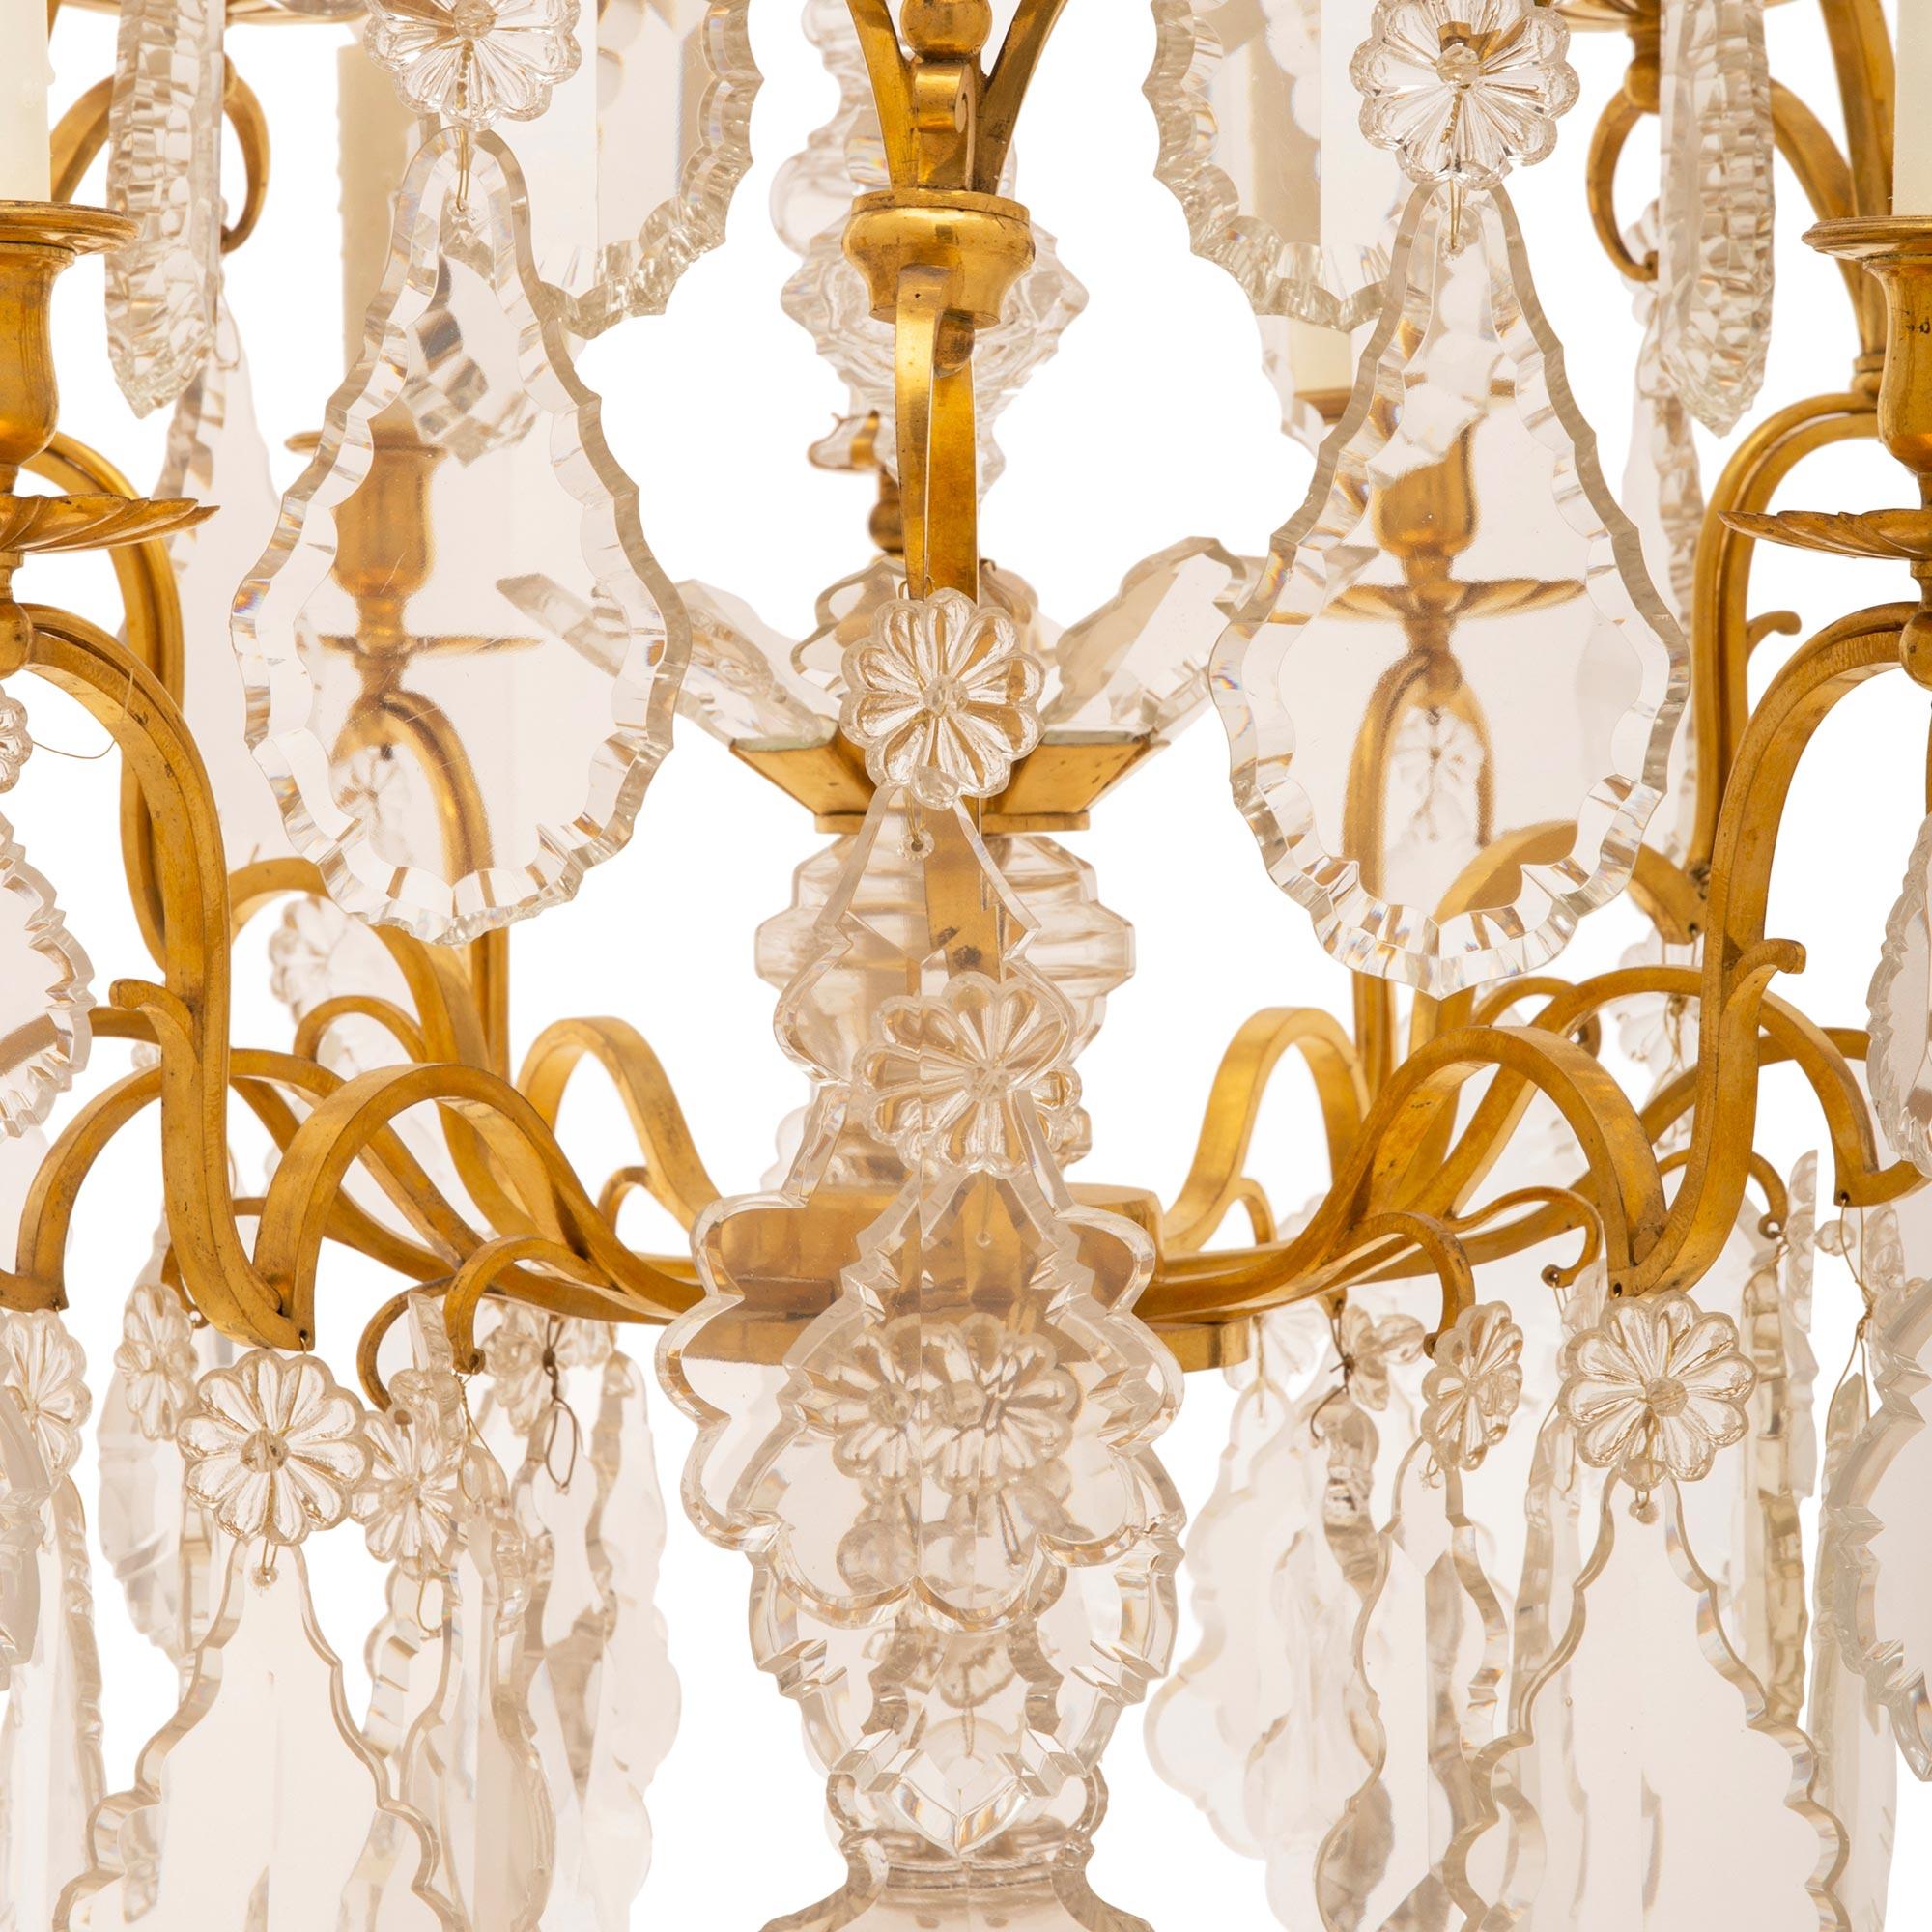 French 19th Century Louis XV Style 12-Light Baccarat Crystal Chandelier For Sale 2